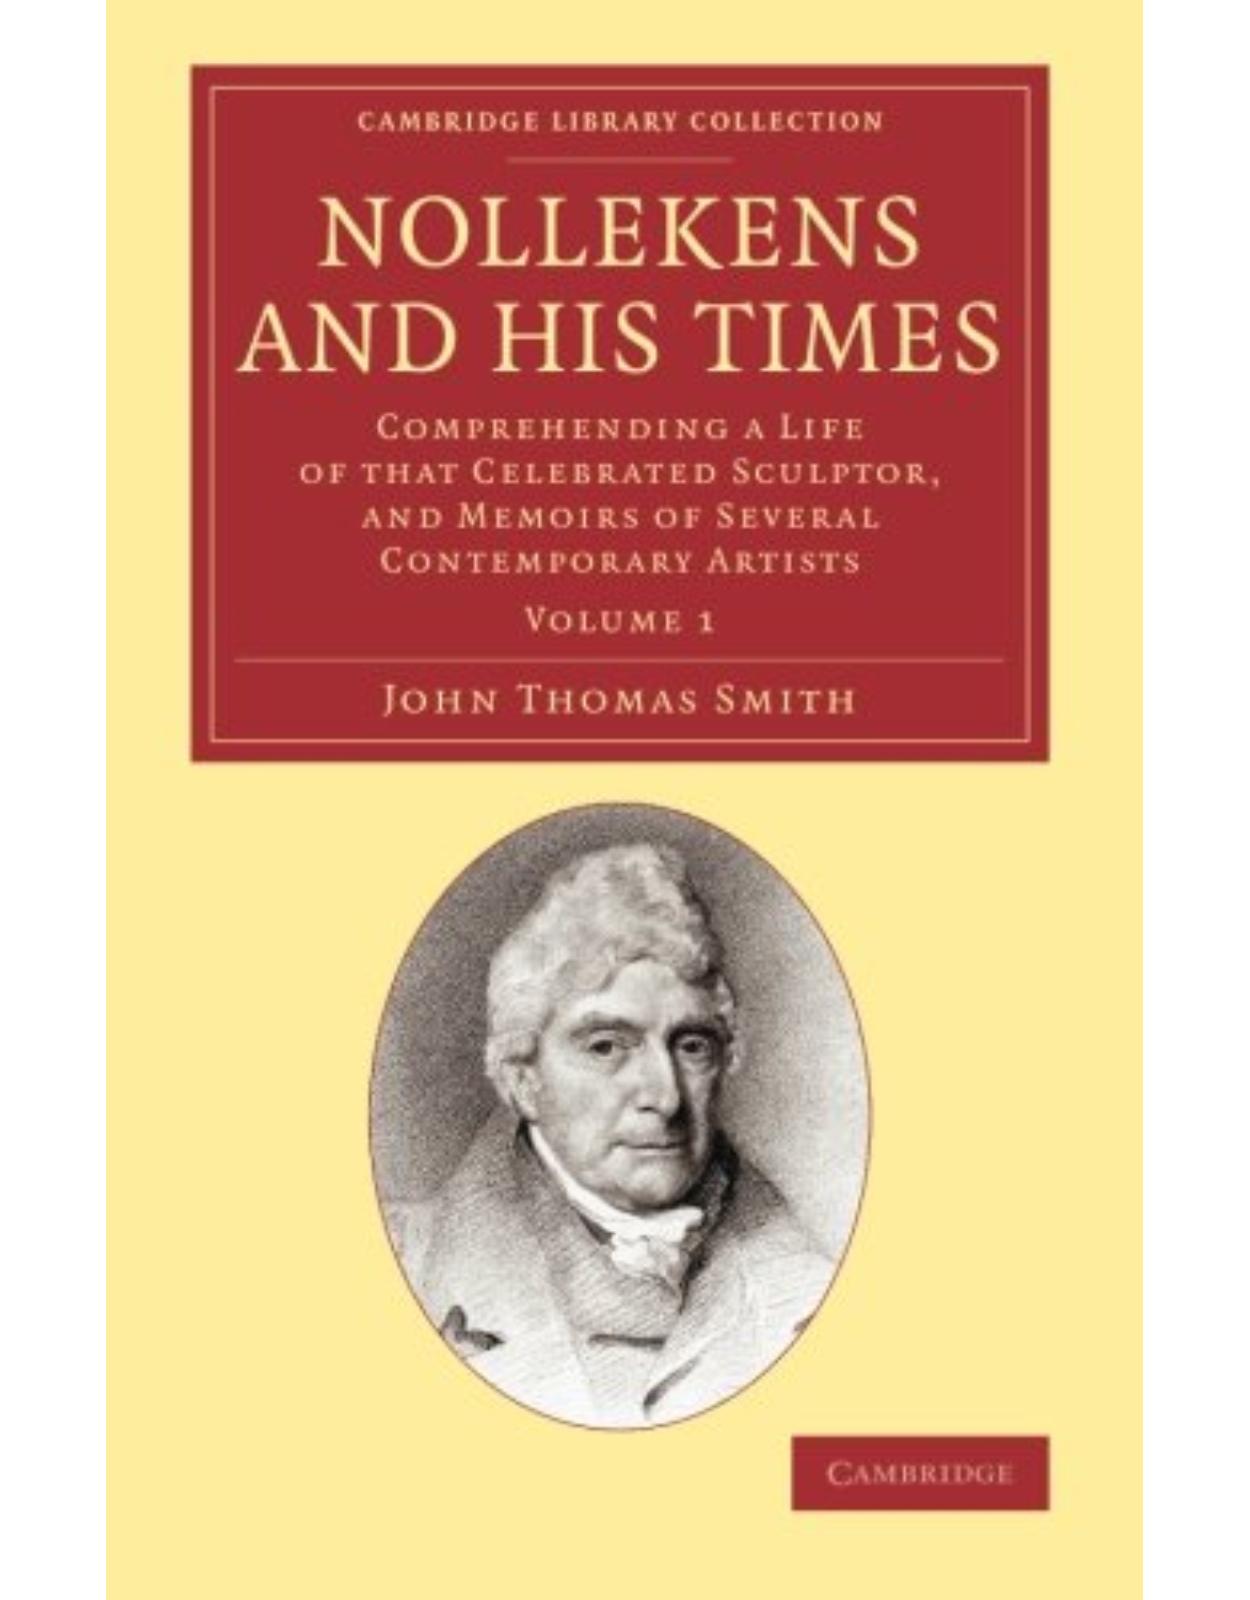 Nollekens and his Times 2 Volume Set: Comprehending a Life of that Celebrated Sculptor, and Memoirs of Several Contemporary Artists